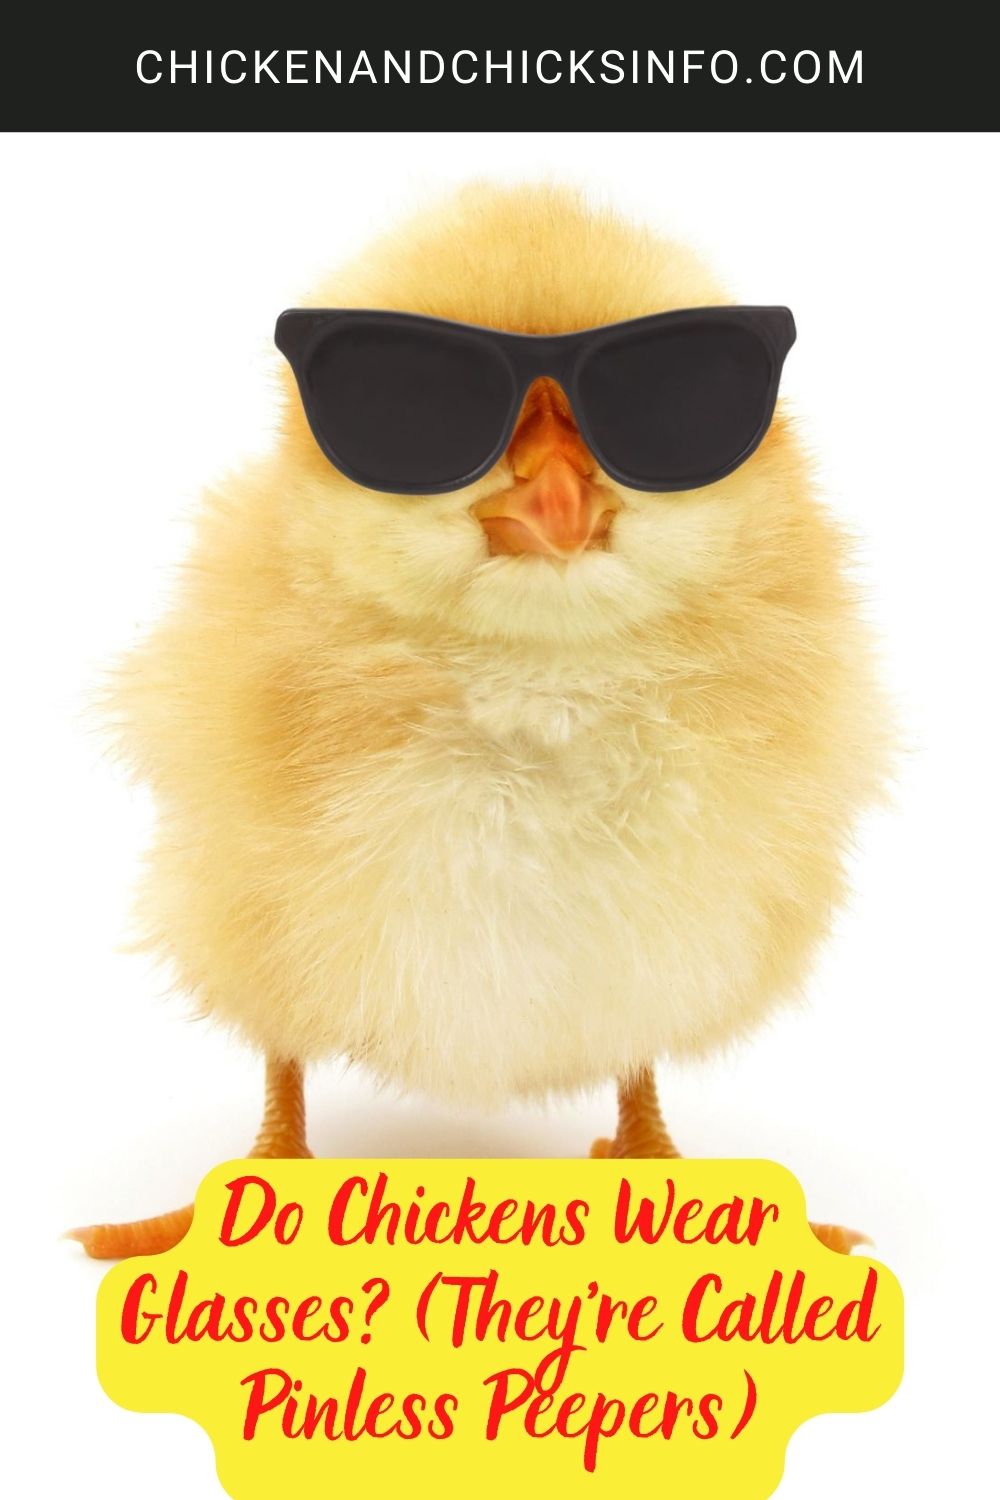 Do Chickens Wear Glasses? (They’re Called Pinless Peepers) poster.
